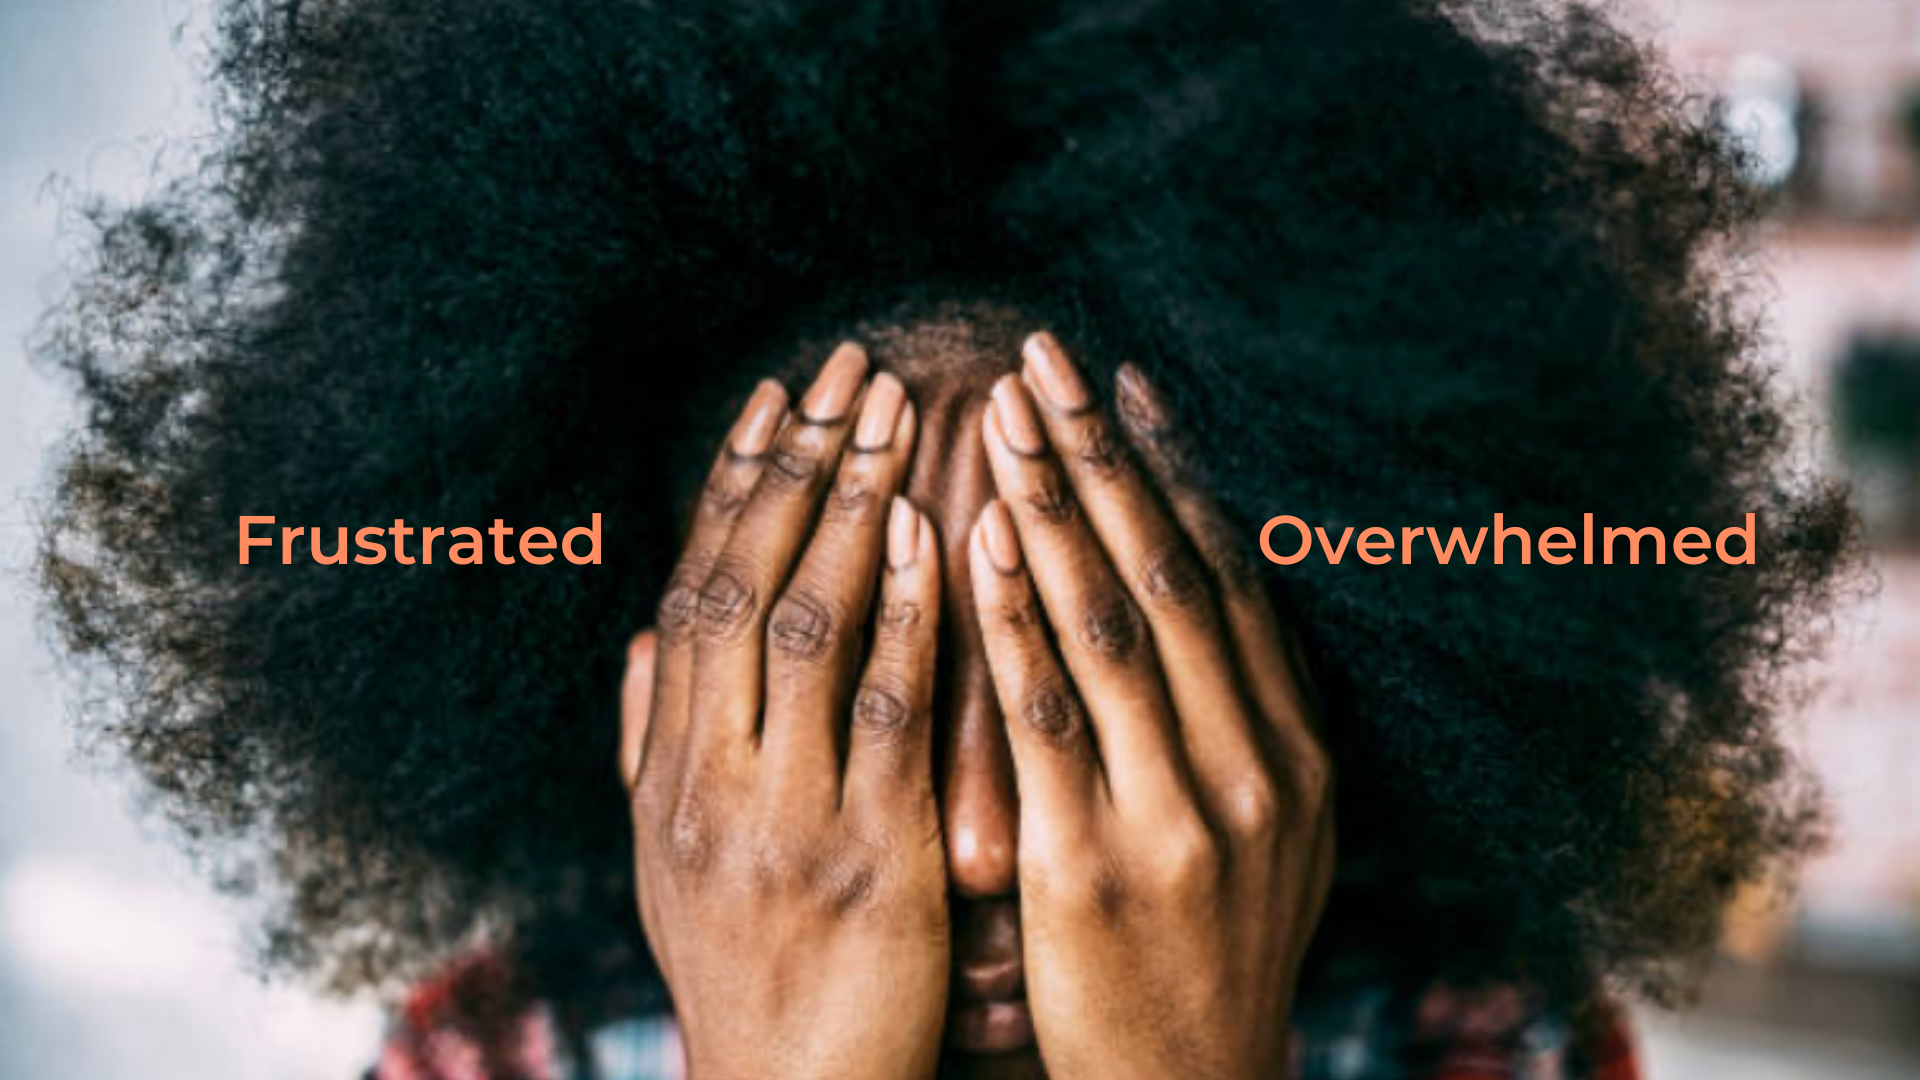 A woman with hands covering her face with the word "frustrated" to the left of her and the word "overwhelmed" to the right of her